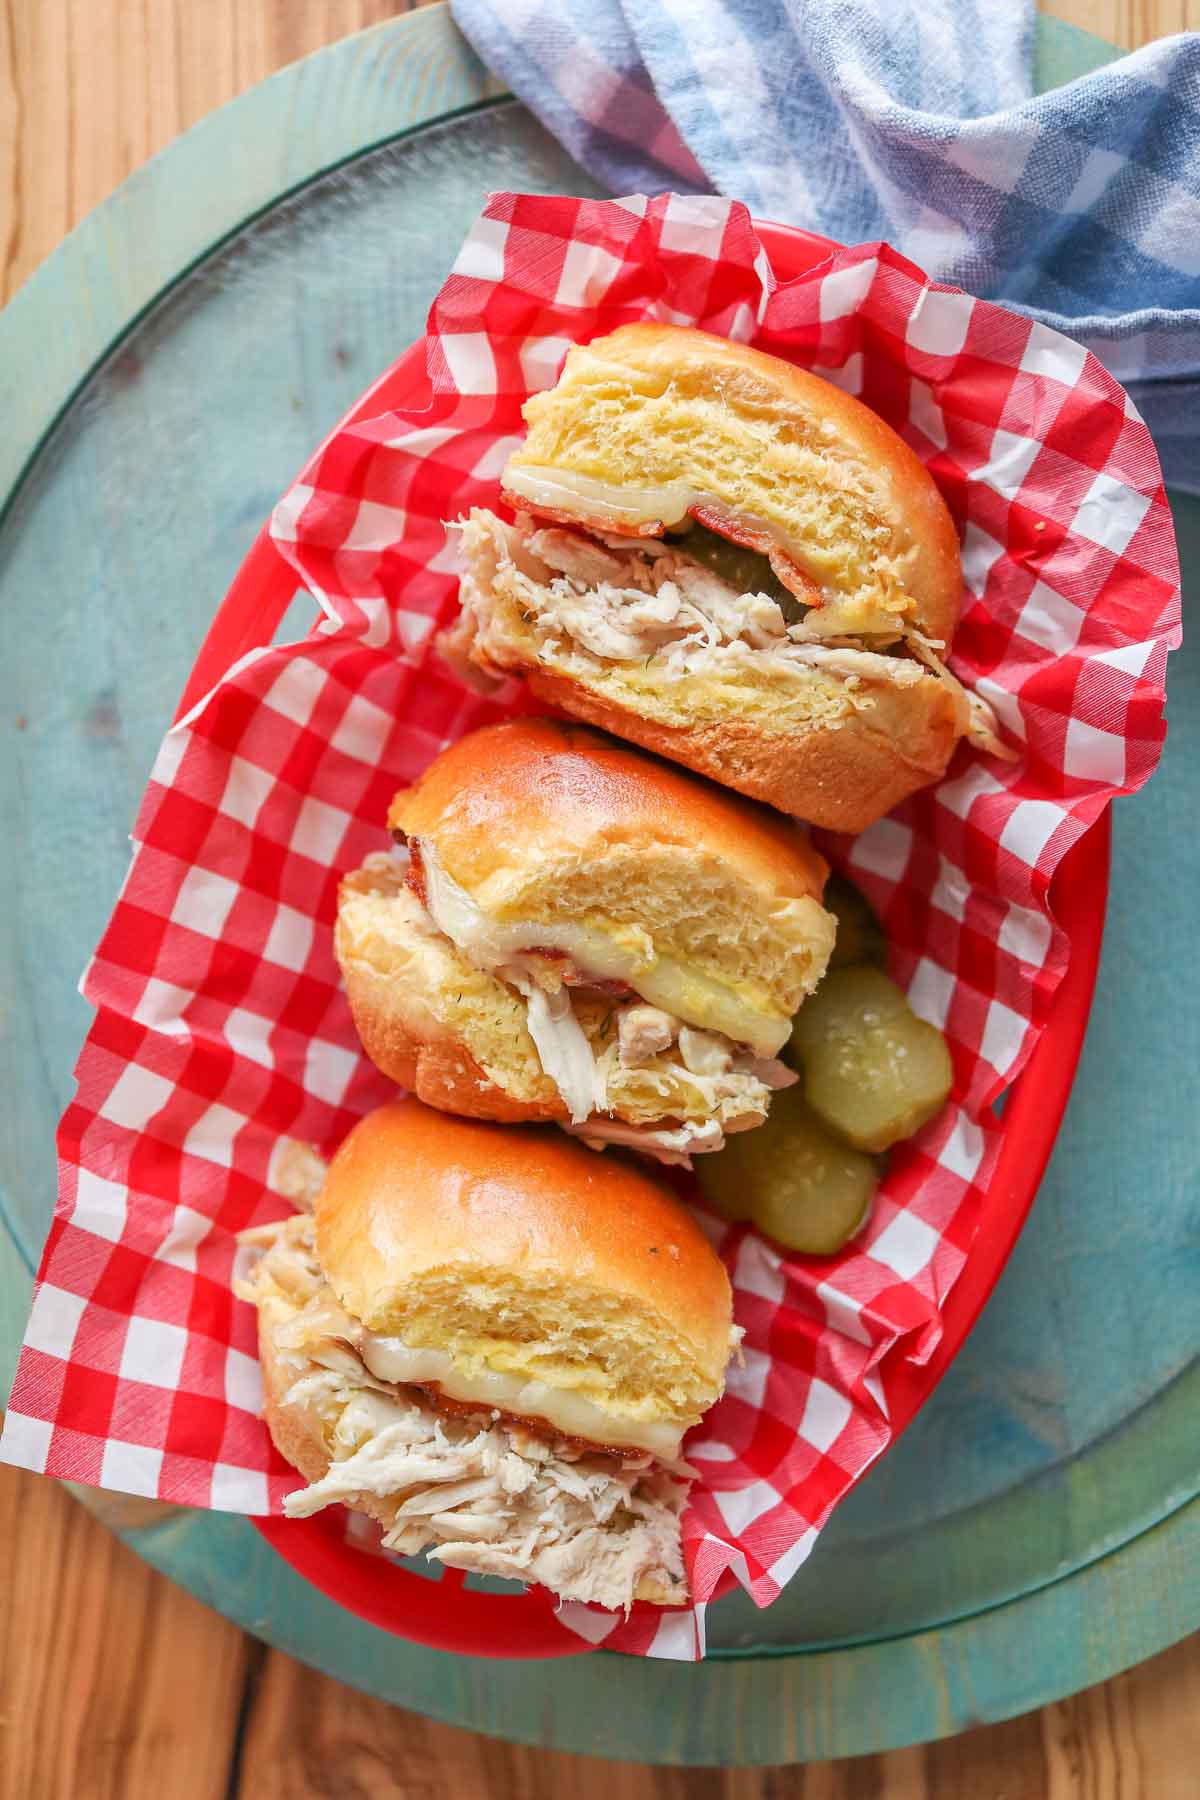 Three chicken bacon ranch sliders in a checkered paper-covered basket.